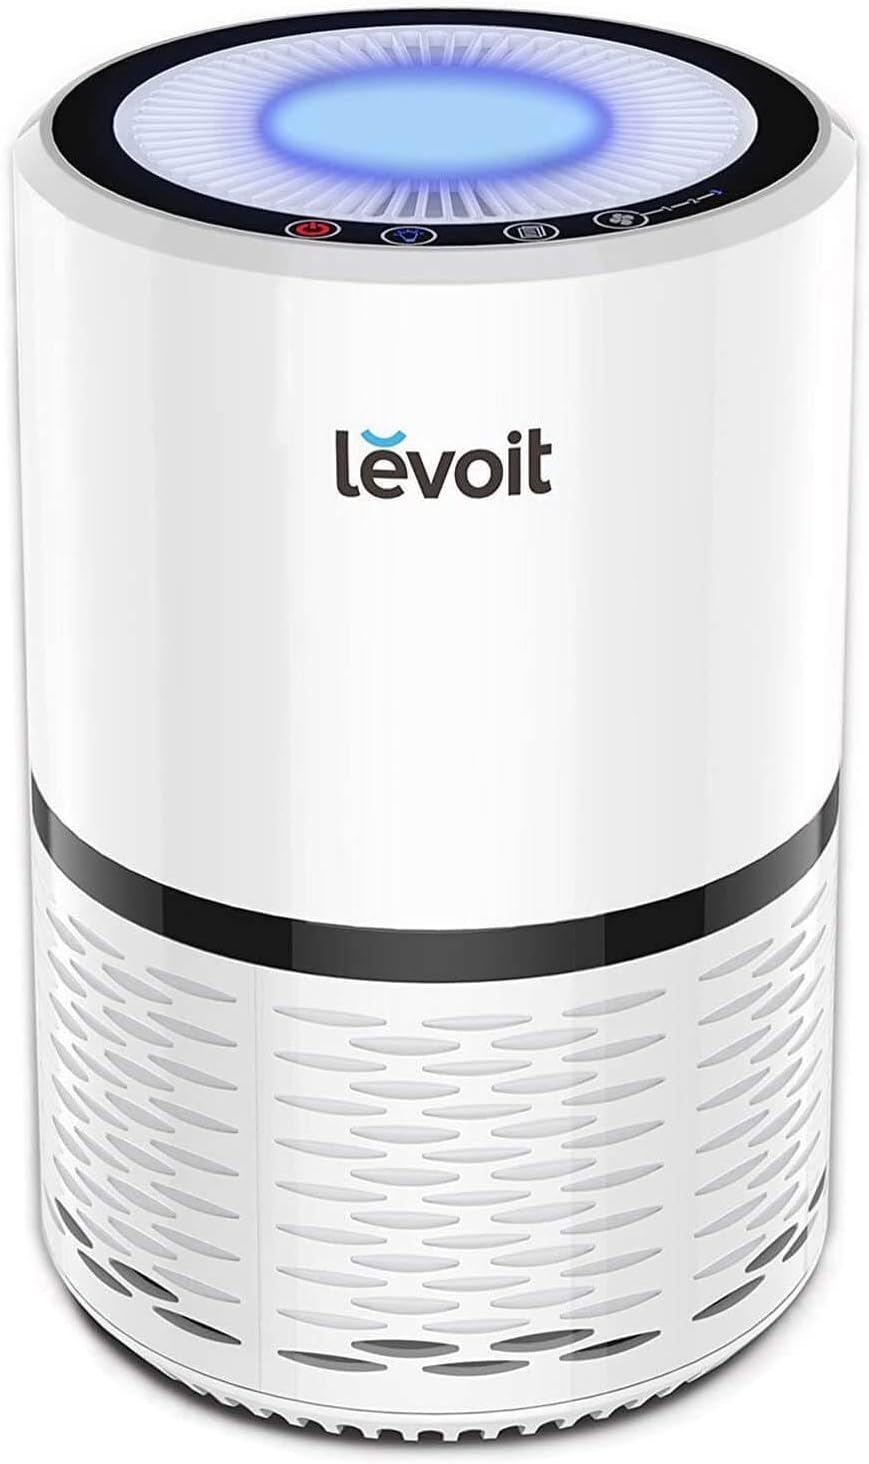 Read more about the article LEVOIT Air Purifiers for Home, HEPA Filter for Smoke, Dust and Pollen for ONLY $69.98 (Was $89.99)